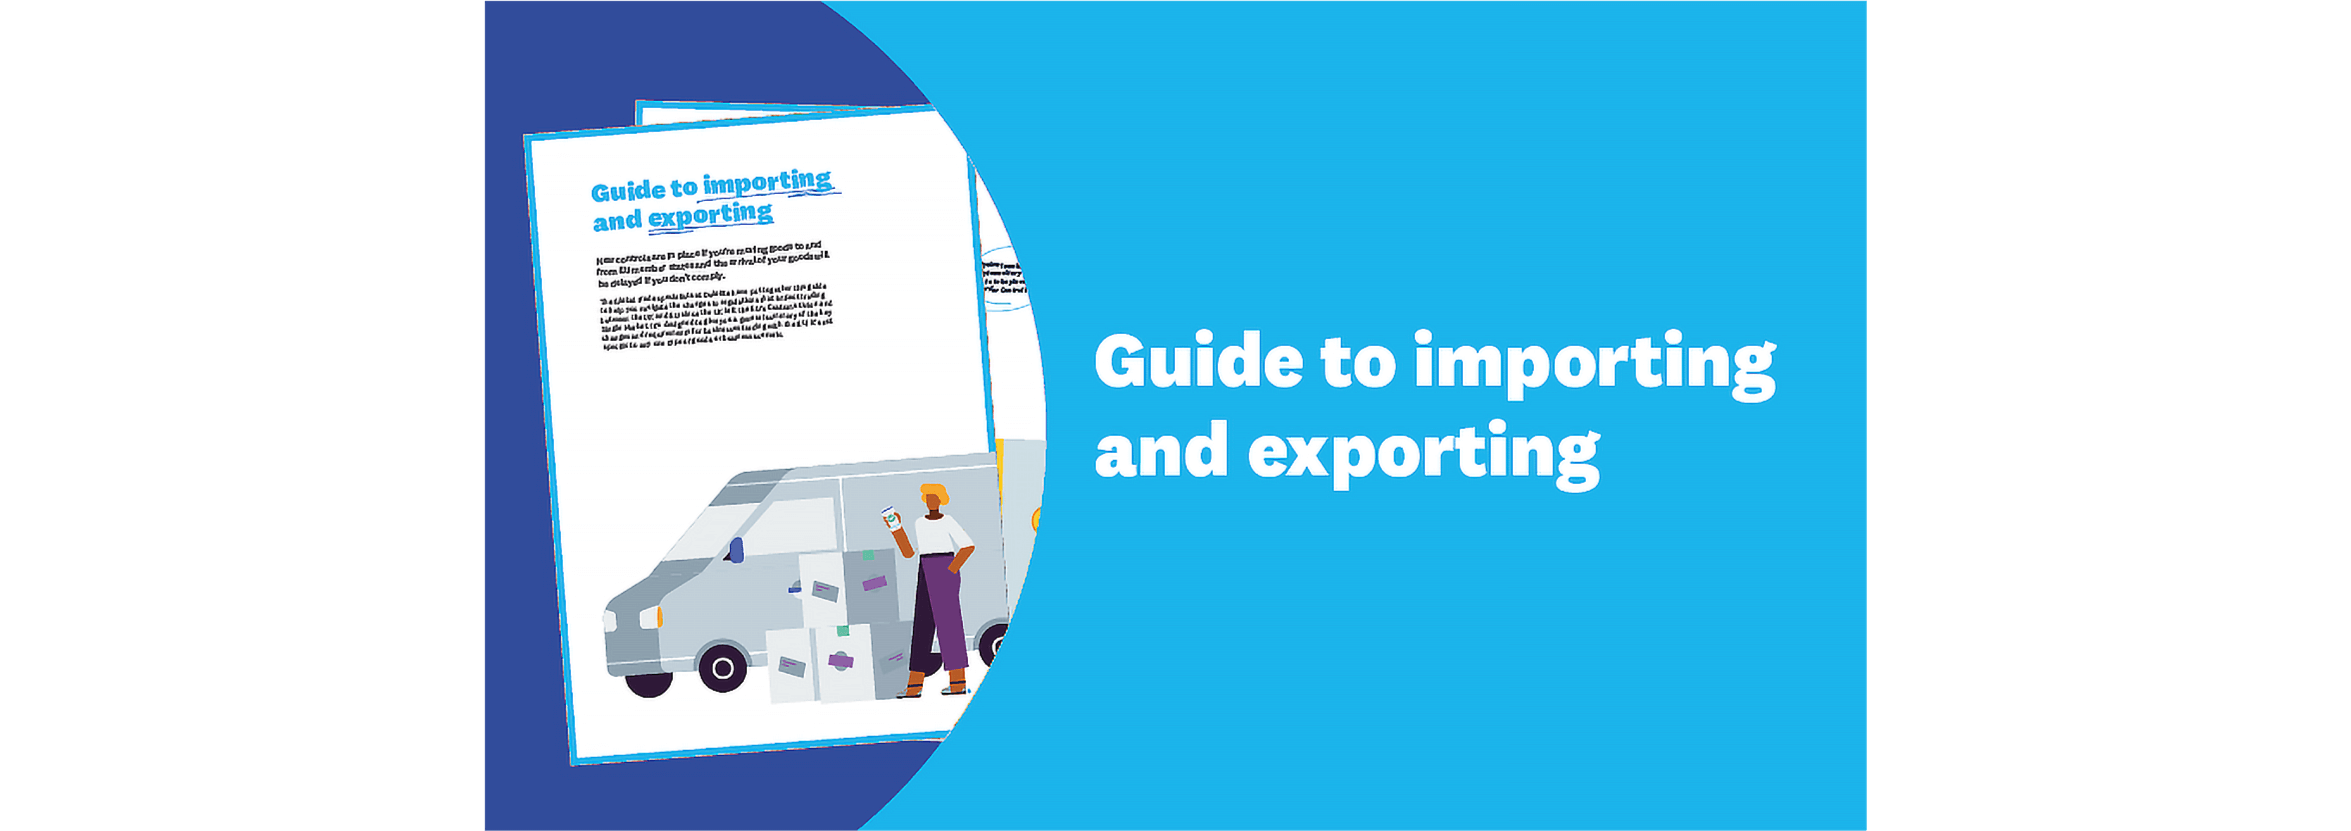 Cover of a guide to importing and exporting.